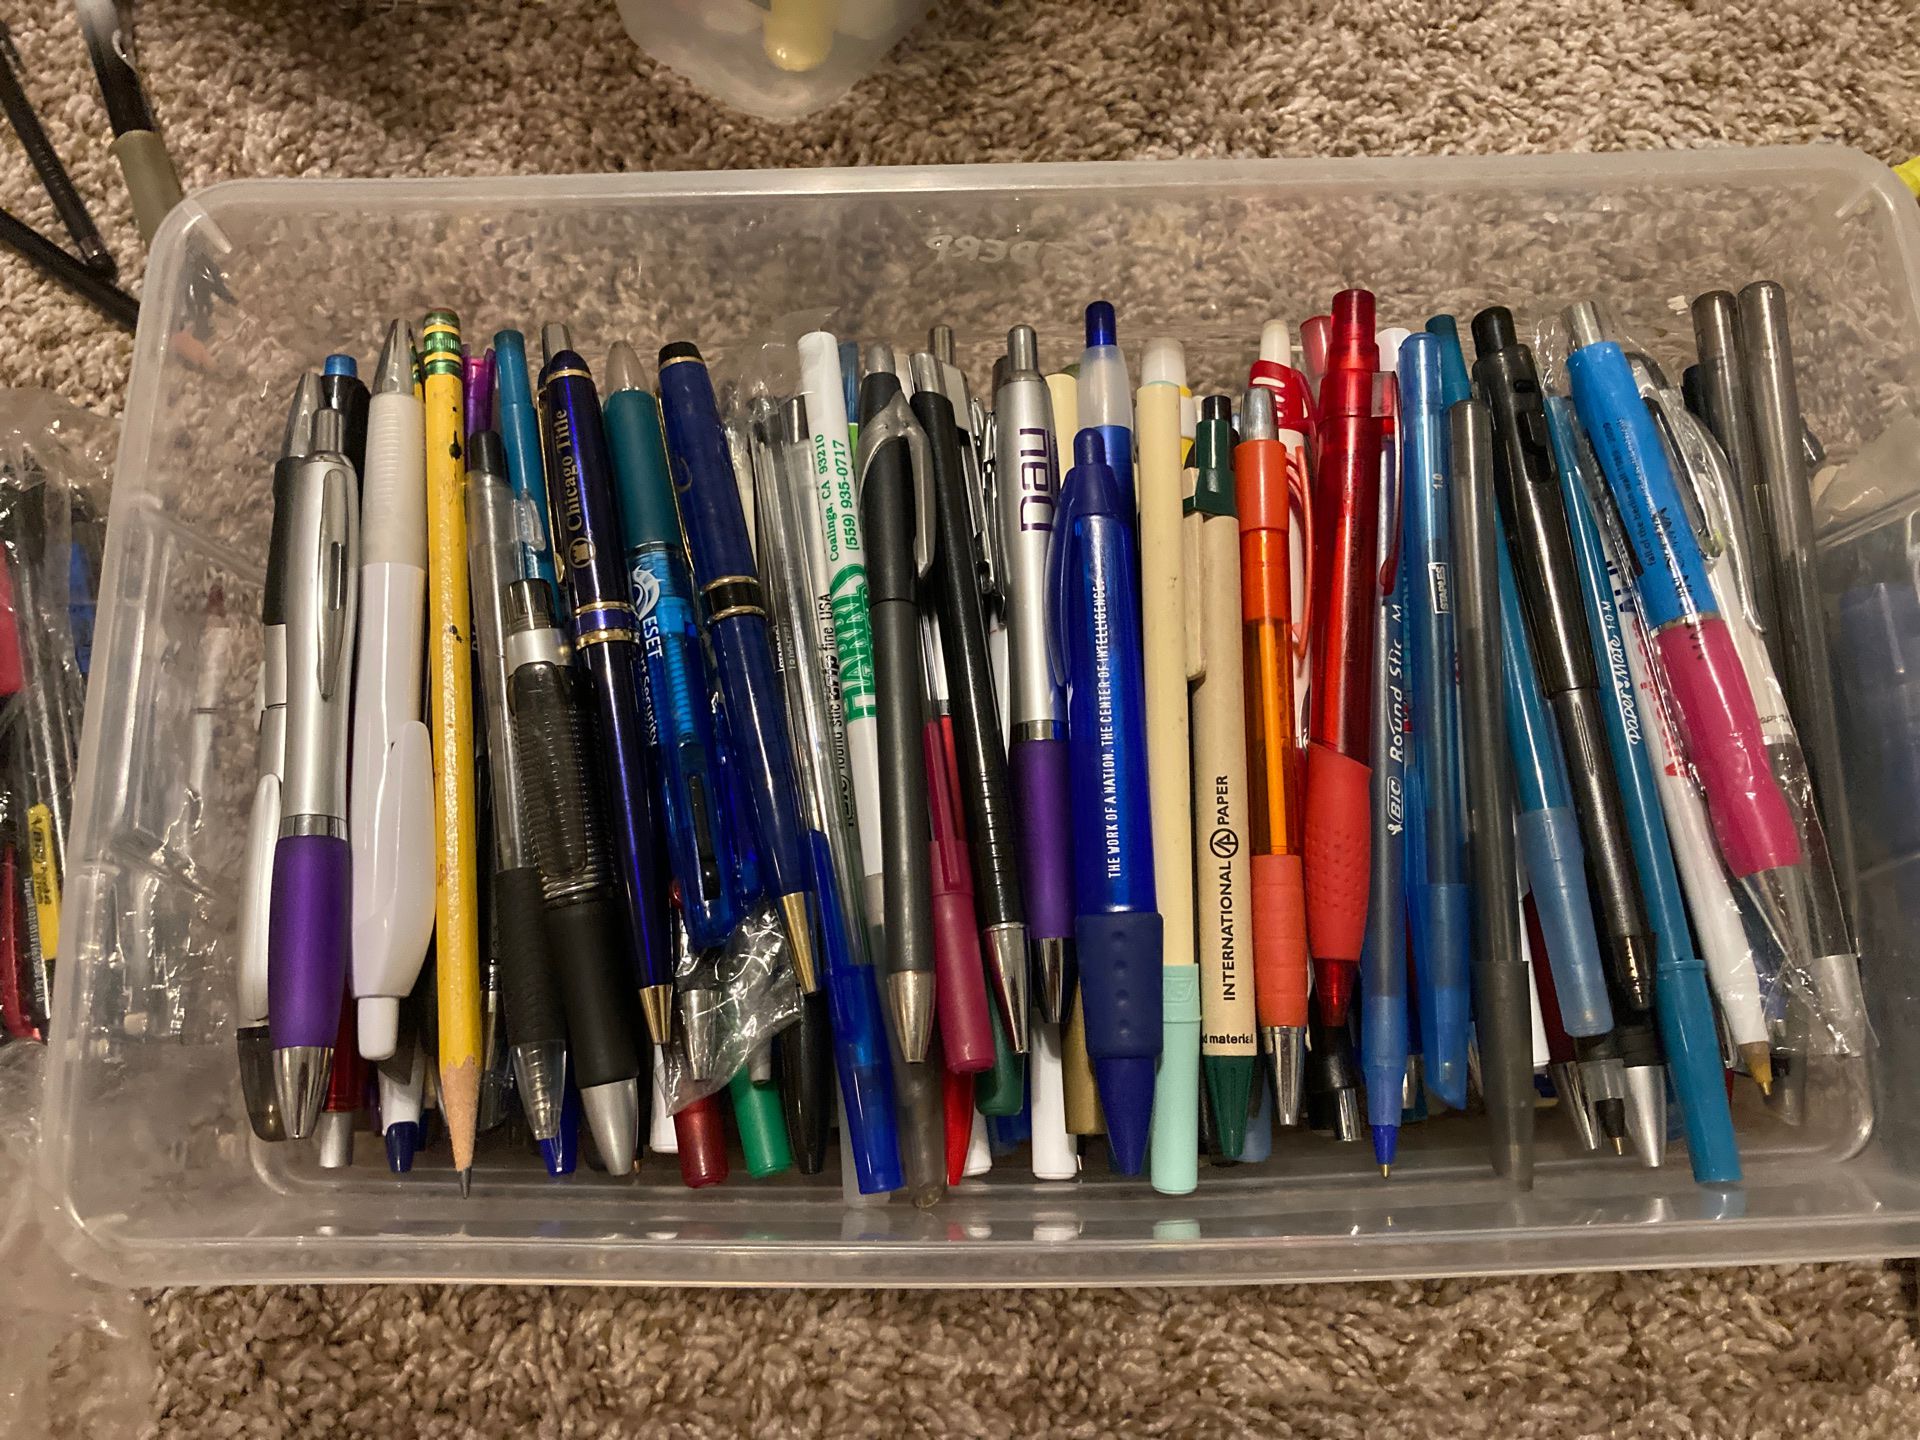 200+ pens and pencil school and office supplies